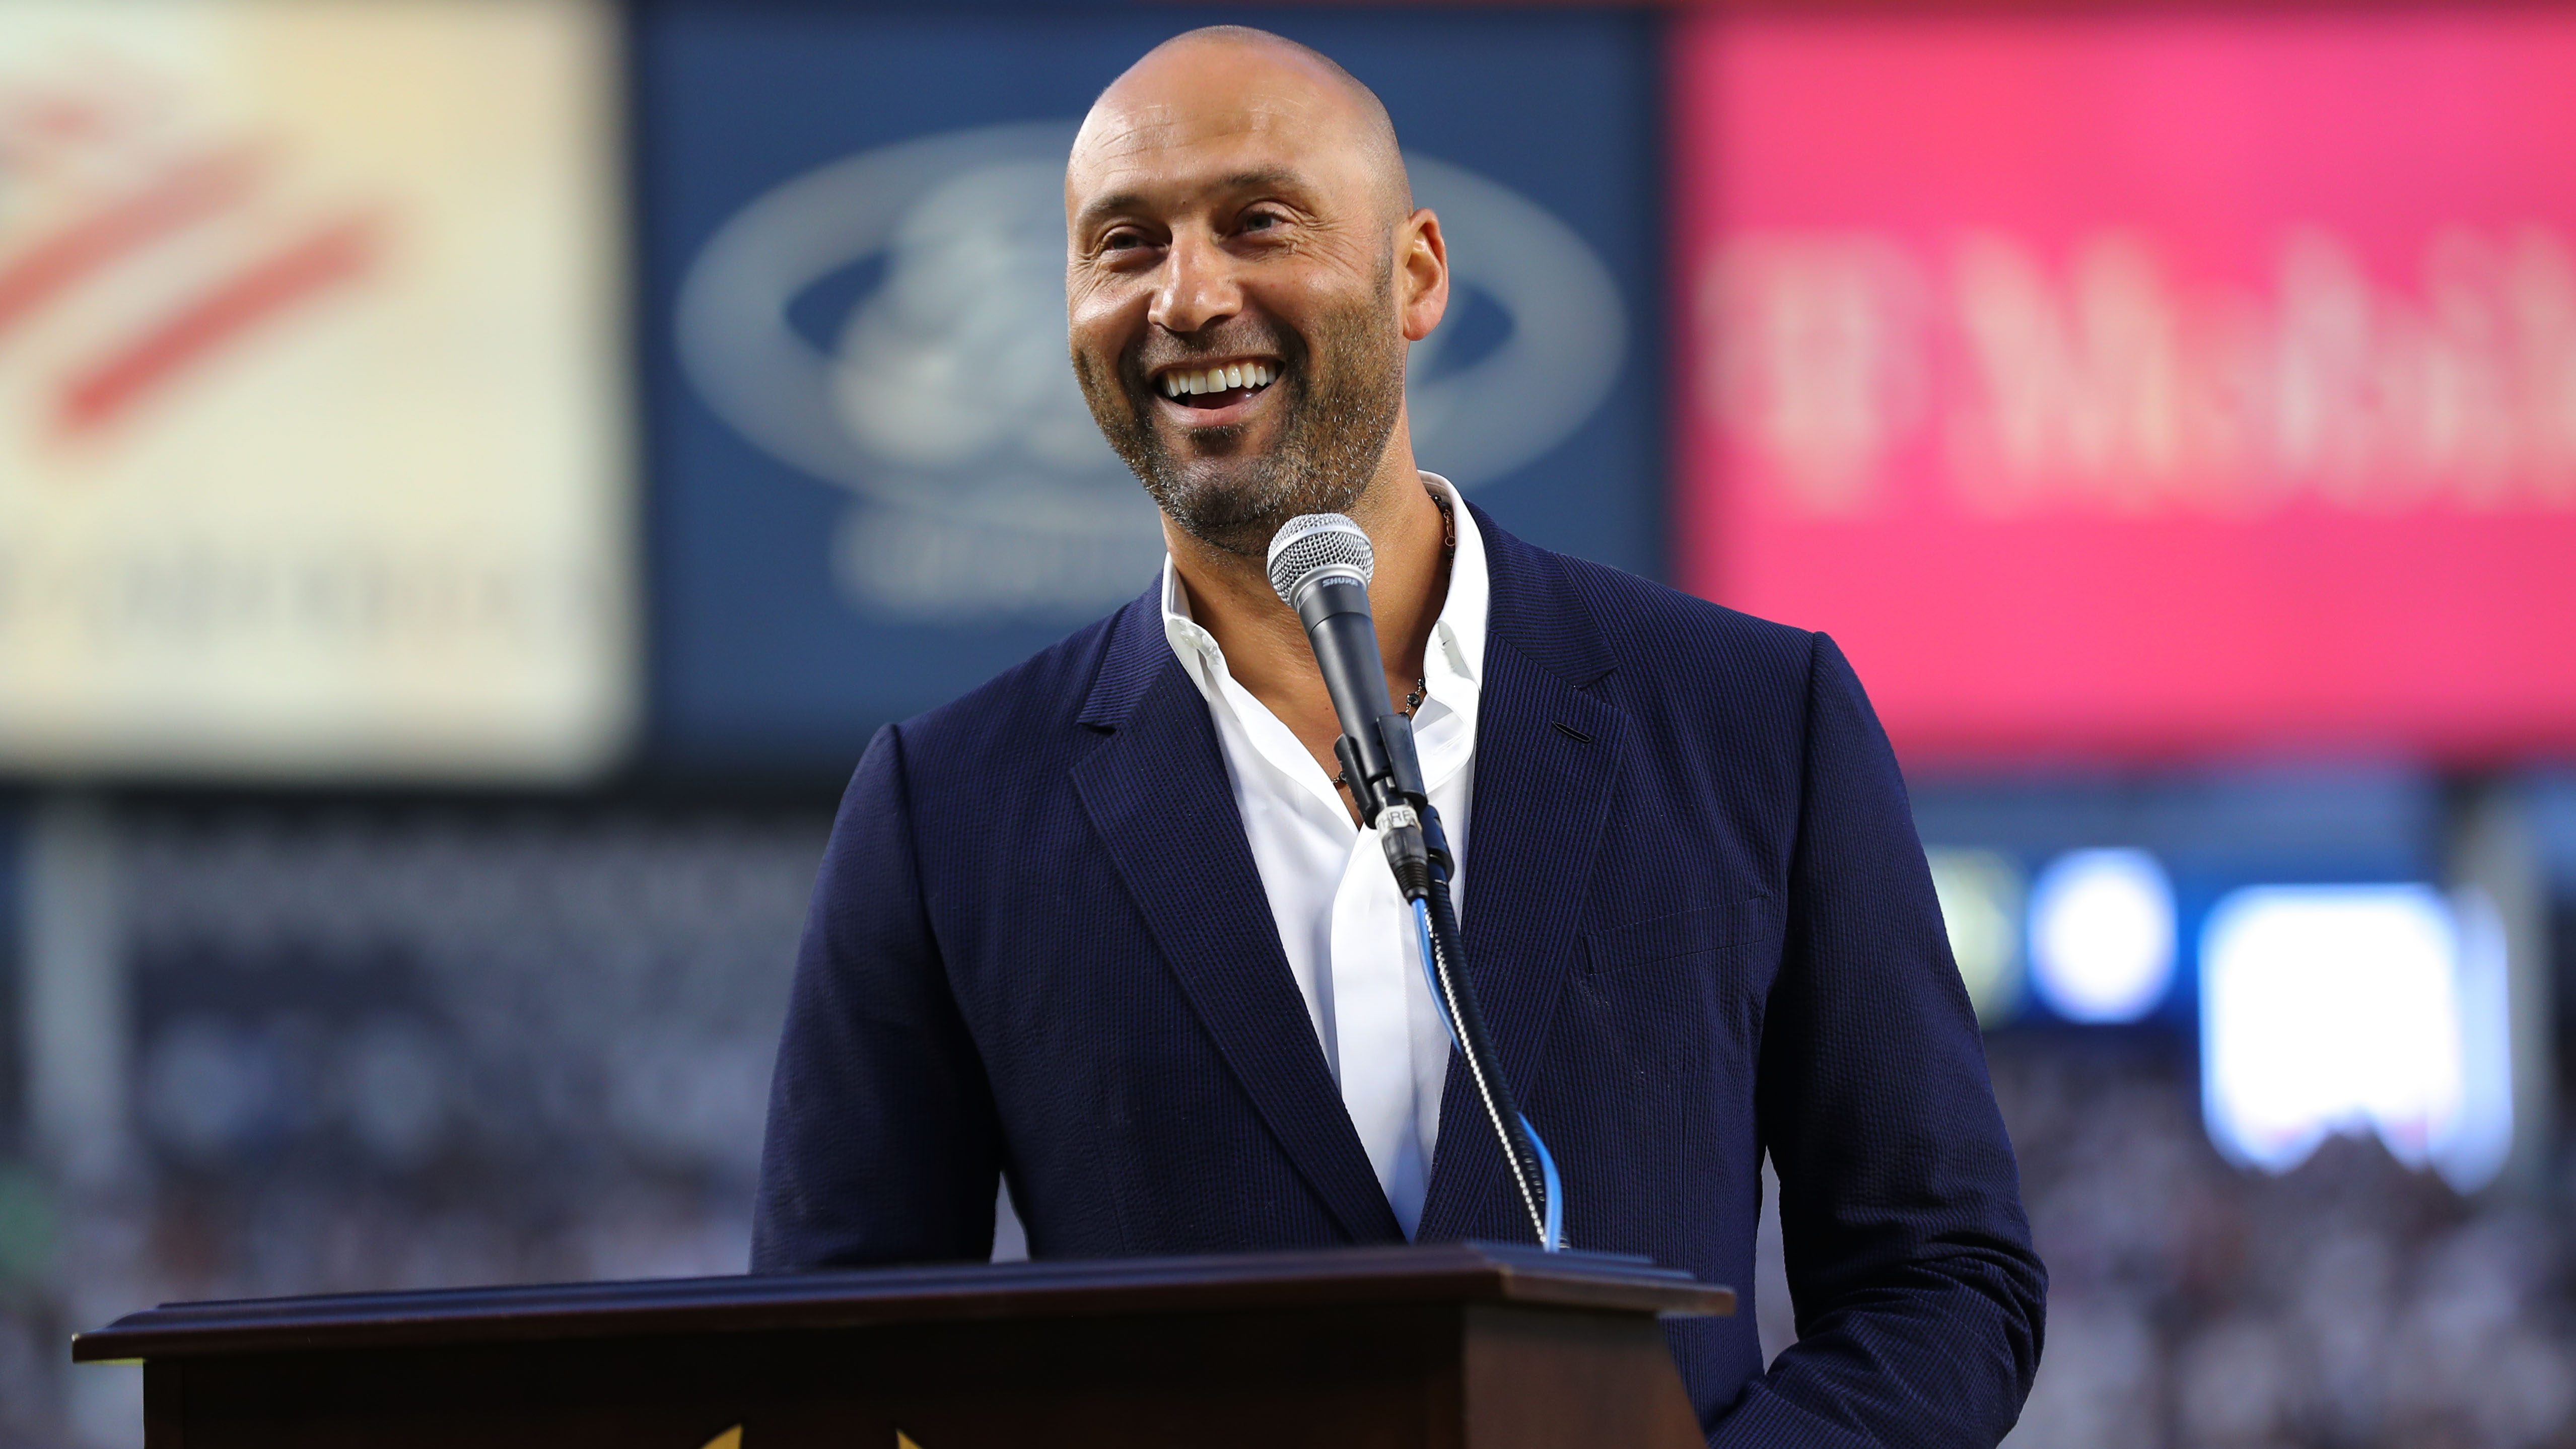 Derek Jeter to be honored by Yankees with Hall of Fame Induction